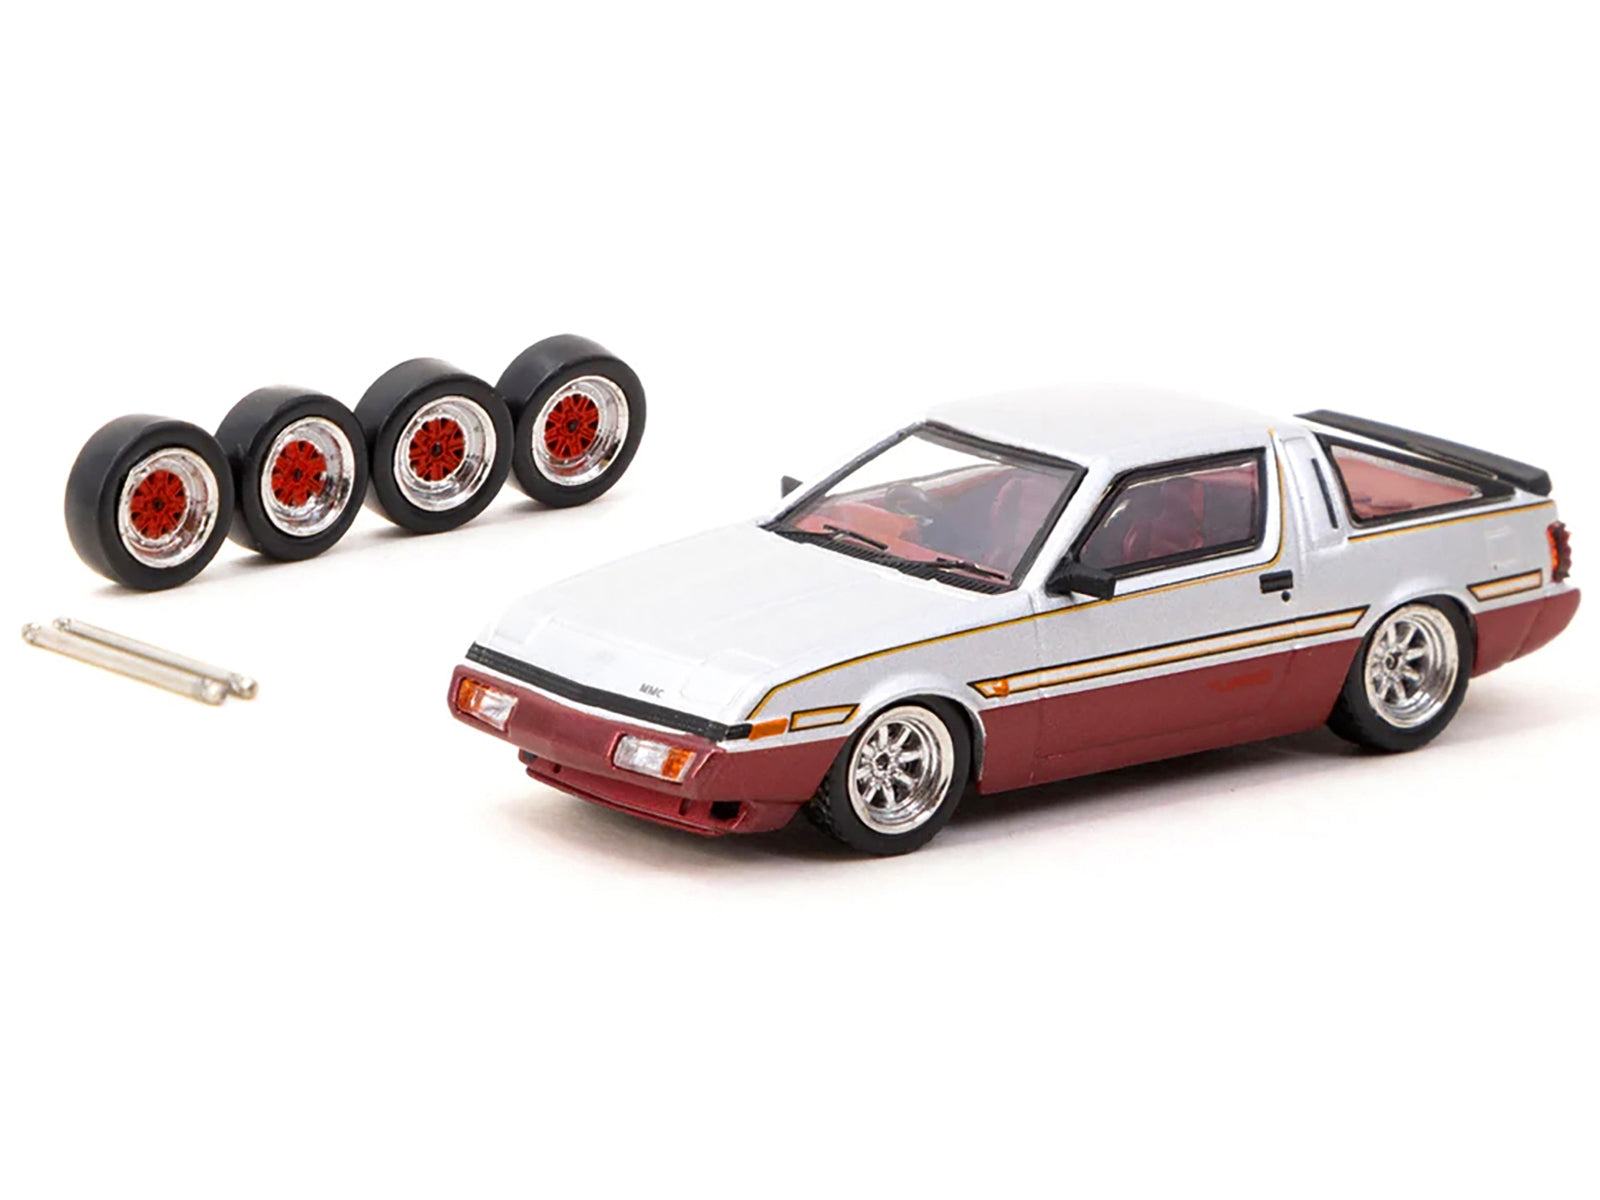 Mitsubishi Starion RHD (Right Hand Drive) Silver Metallic and Dark Red with Red Interior with Extra Wheels "Road64" Series 1/64 Diecast Model Car by Tarmac Works Tarmac Works